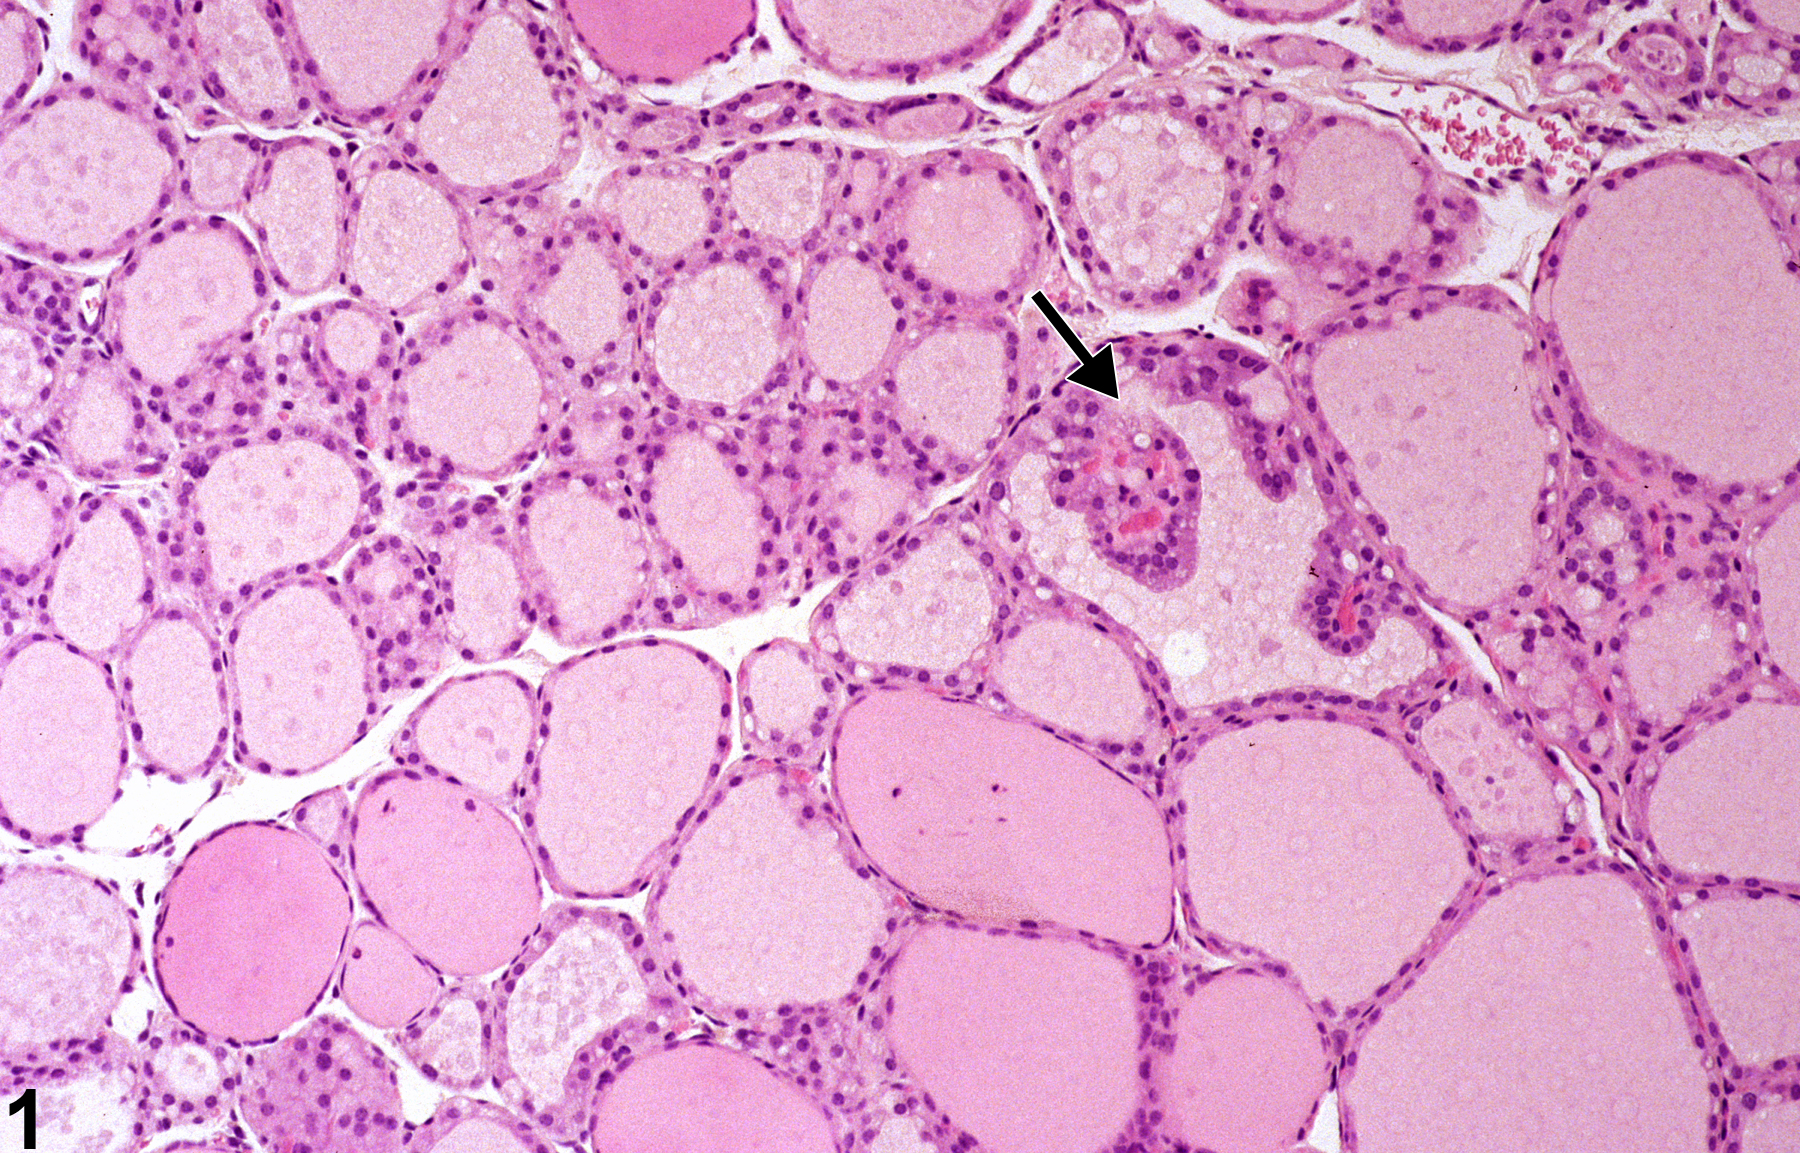 Image of follicle epithelium hyperplasia in the thyroid gland from a male B6C3F1 mouse in a chronic study